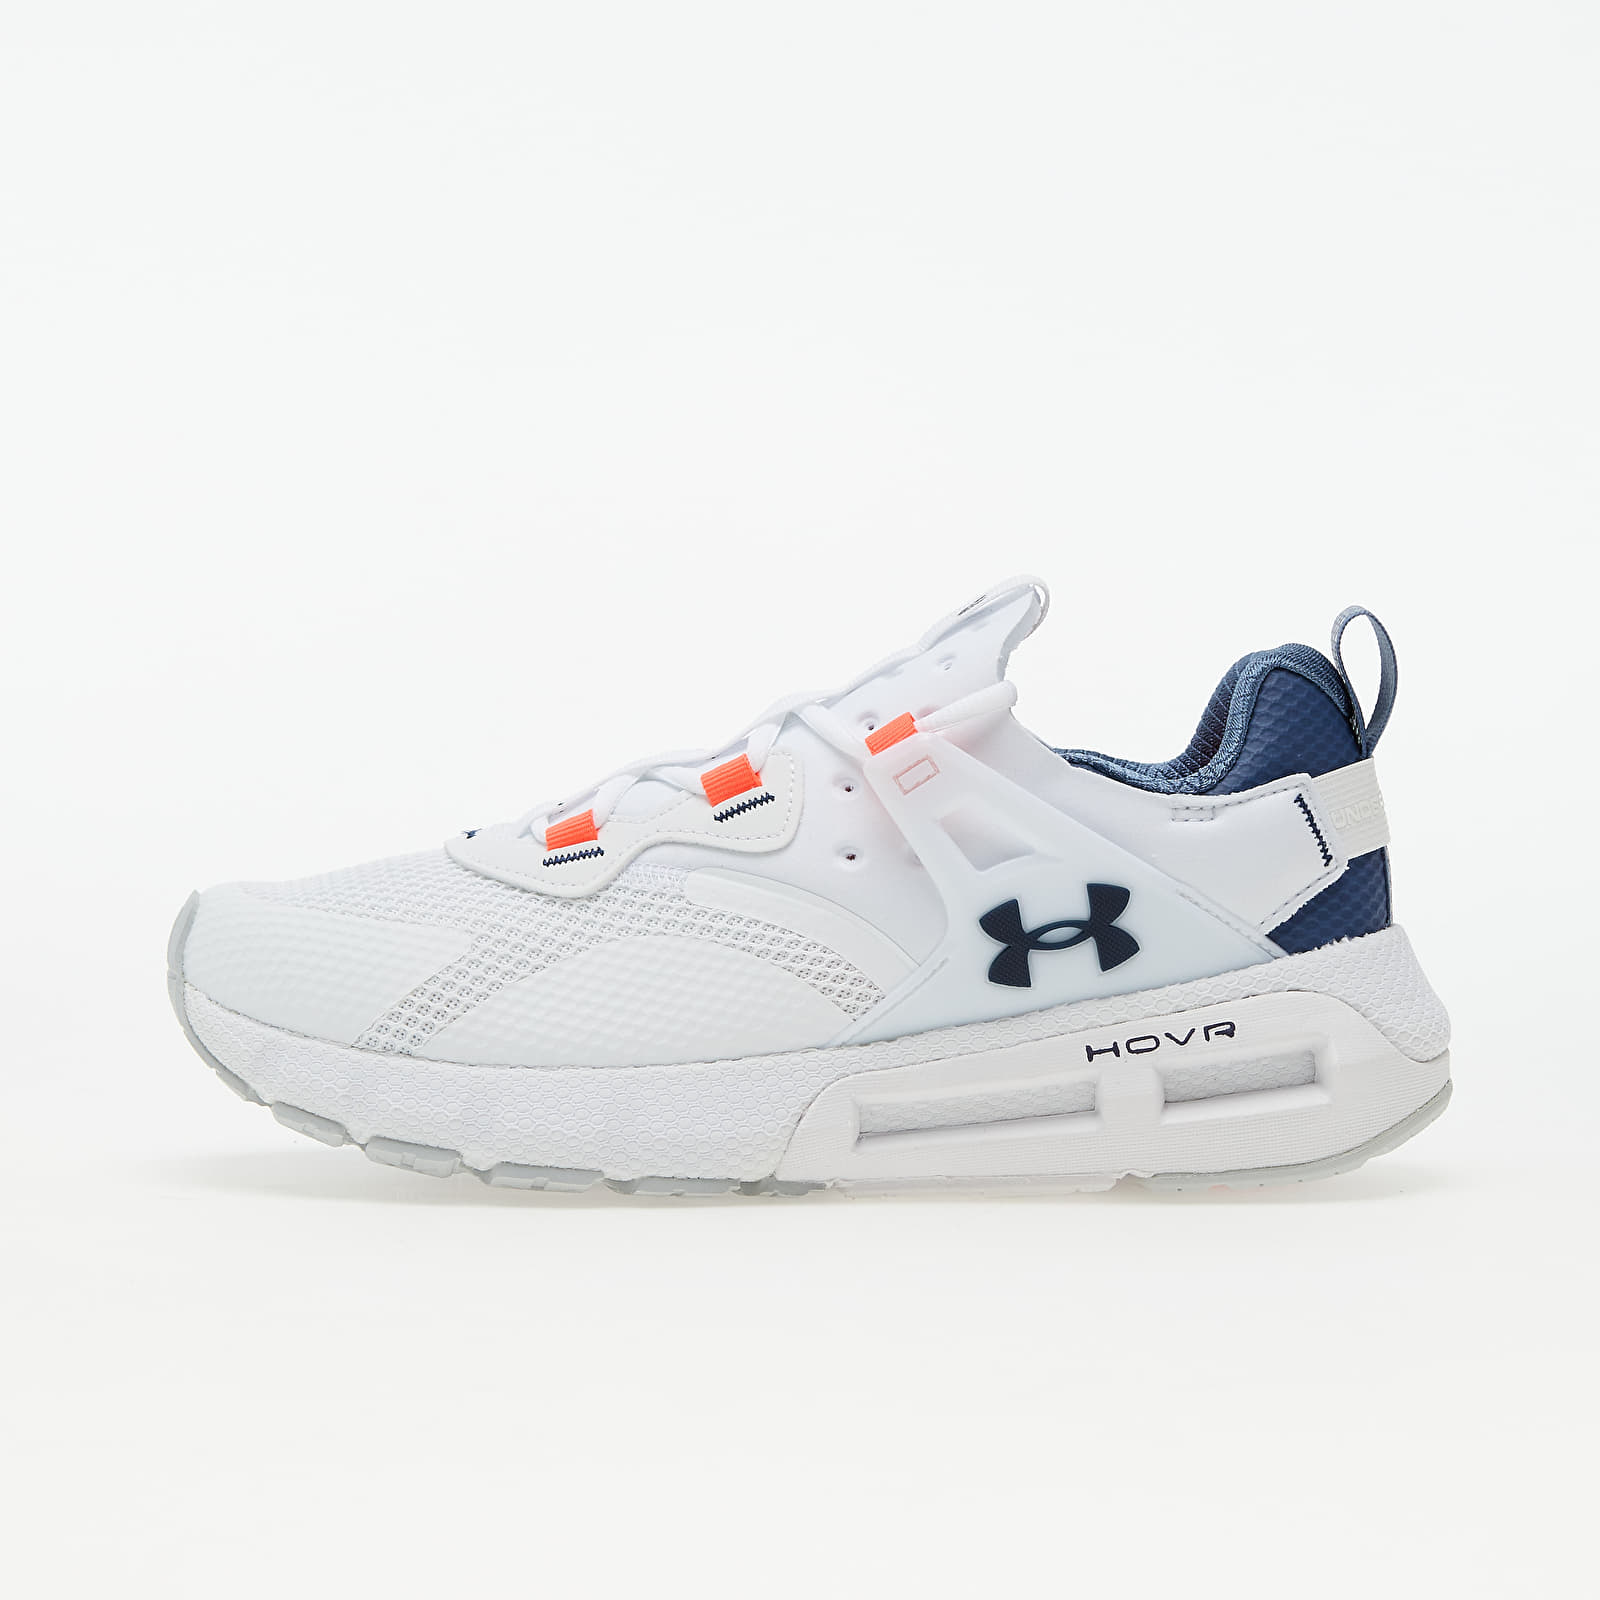 Chaussures et baskets homme Under Armour HOVR Mega White/ Mineral Blue/ Academy